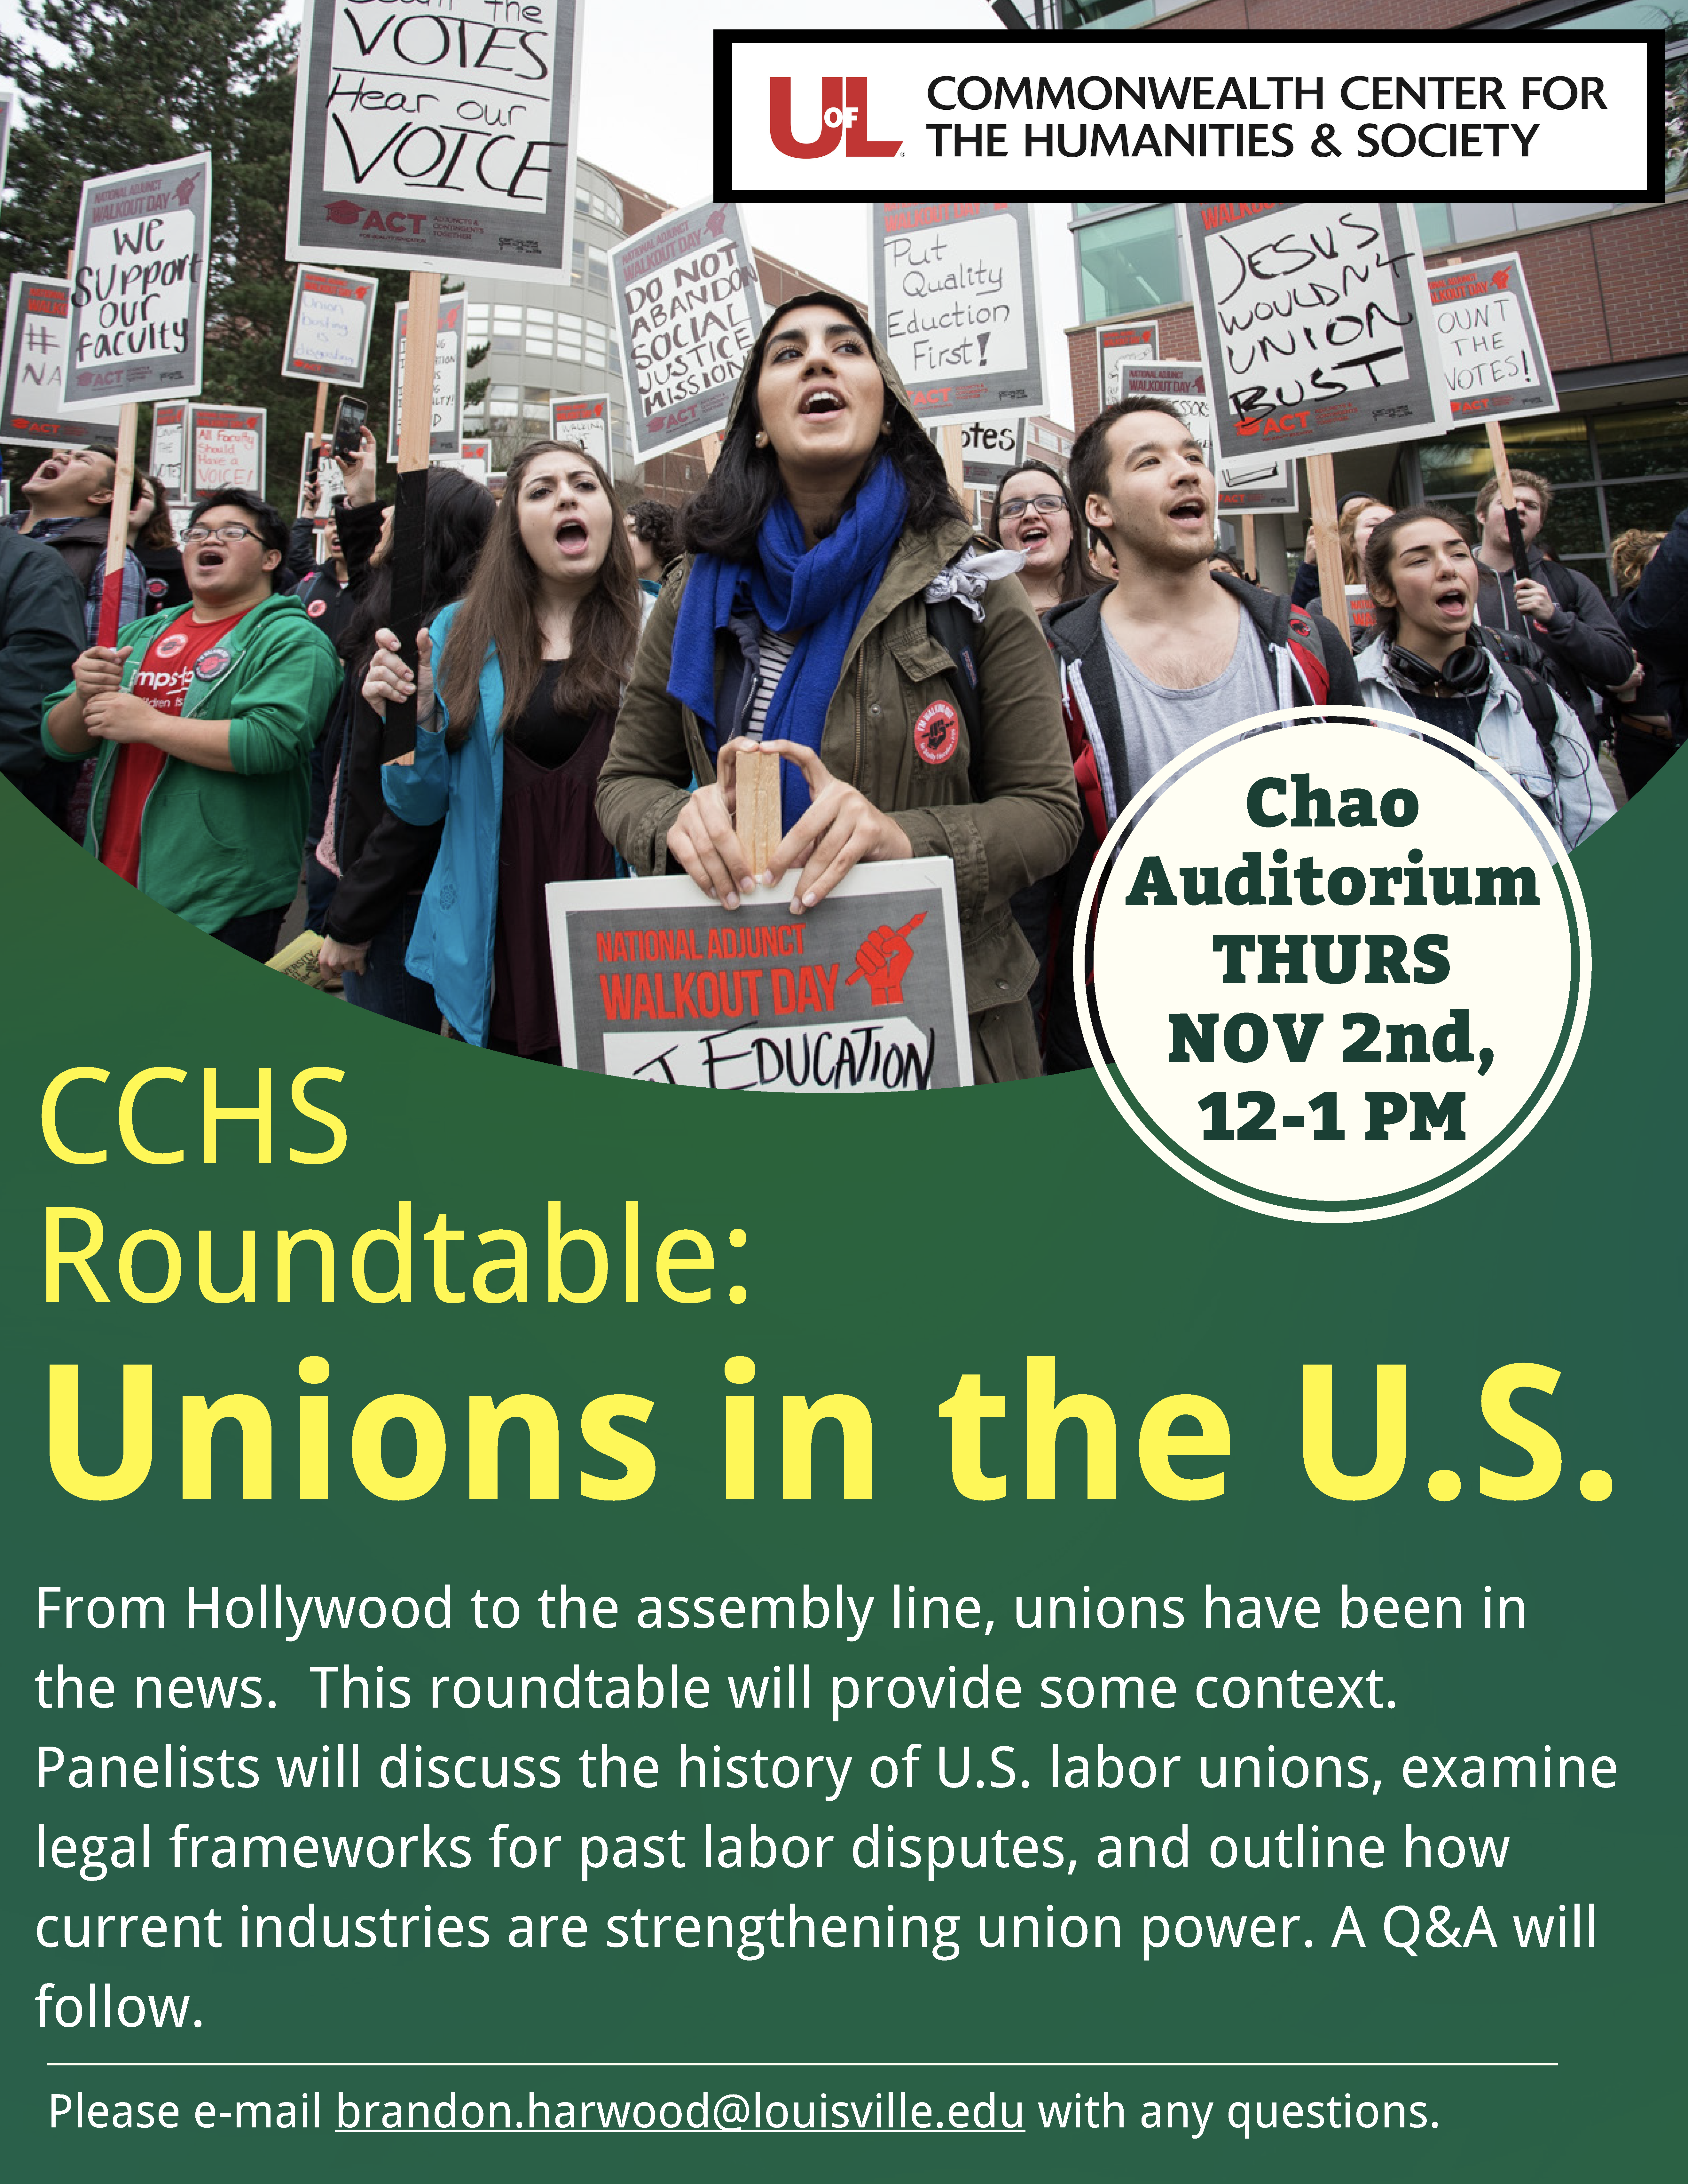 CCHS Roundtable: Chao Auditorium THURS NOV 2nd, 12-1 PM Unions in the U.S. From Hollywood to the assembly line, unions have been in the news. This roundtable will provide some context. Panelists will discuss the history of U.S. labor unions, examine legal frameworks for past labor disputes, and outline how current industries are strengthening union power. A Q&A will follow. Please e-mail brandon.harwood@louisville.edu with any questions.